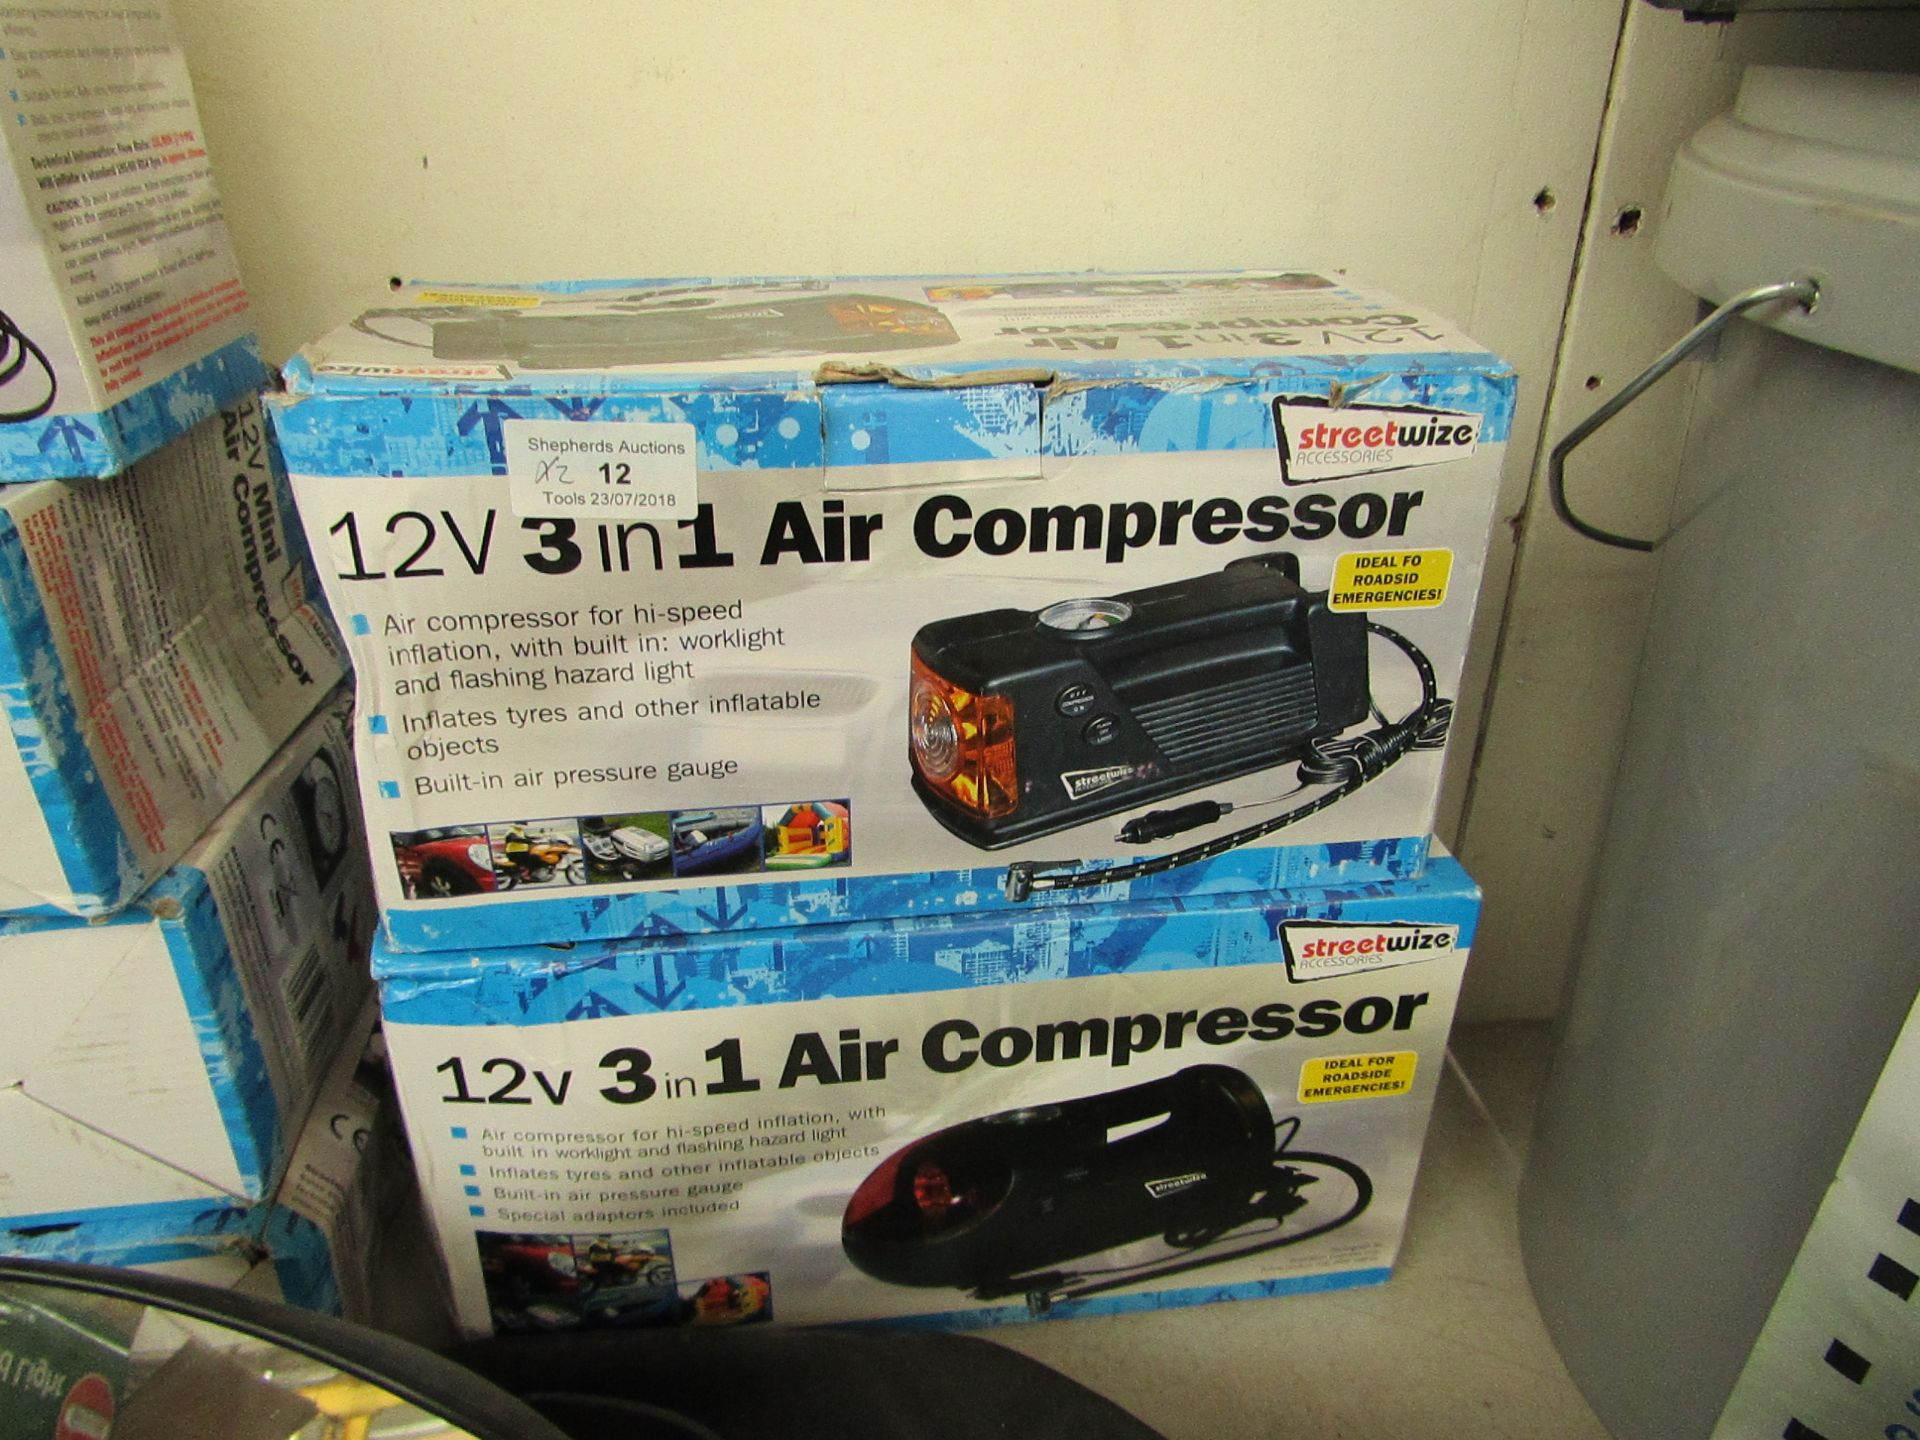 2x varied design Streetwize 12v 3 in 1 air compressor, both boxed and unchecked